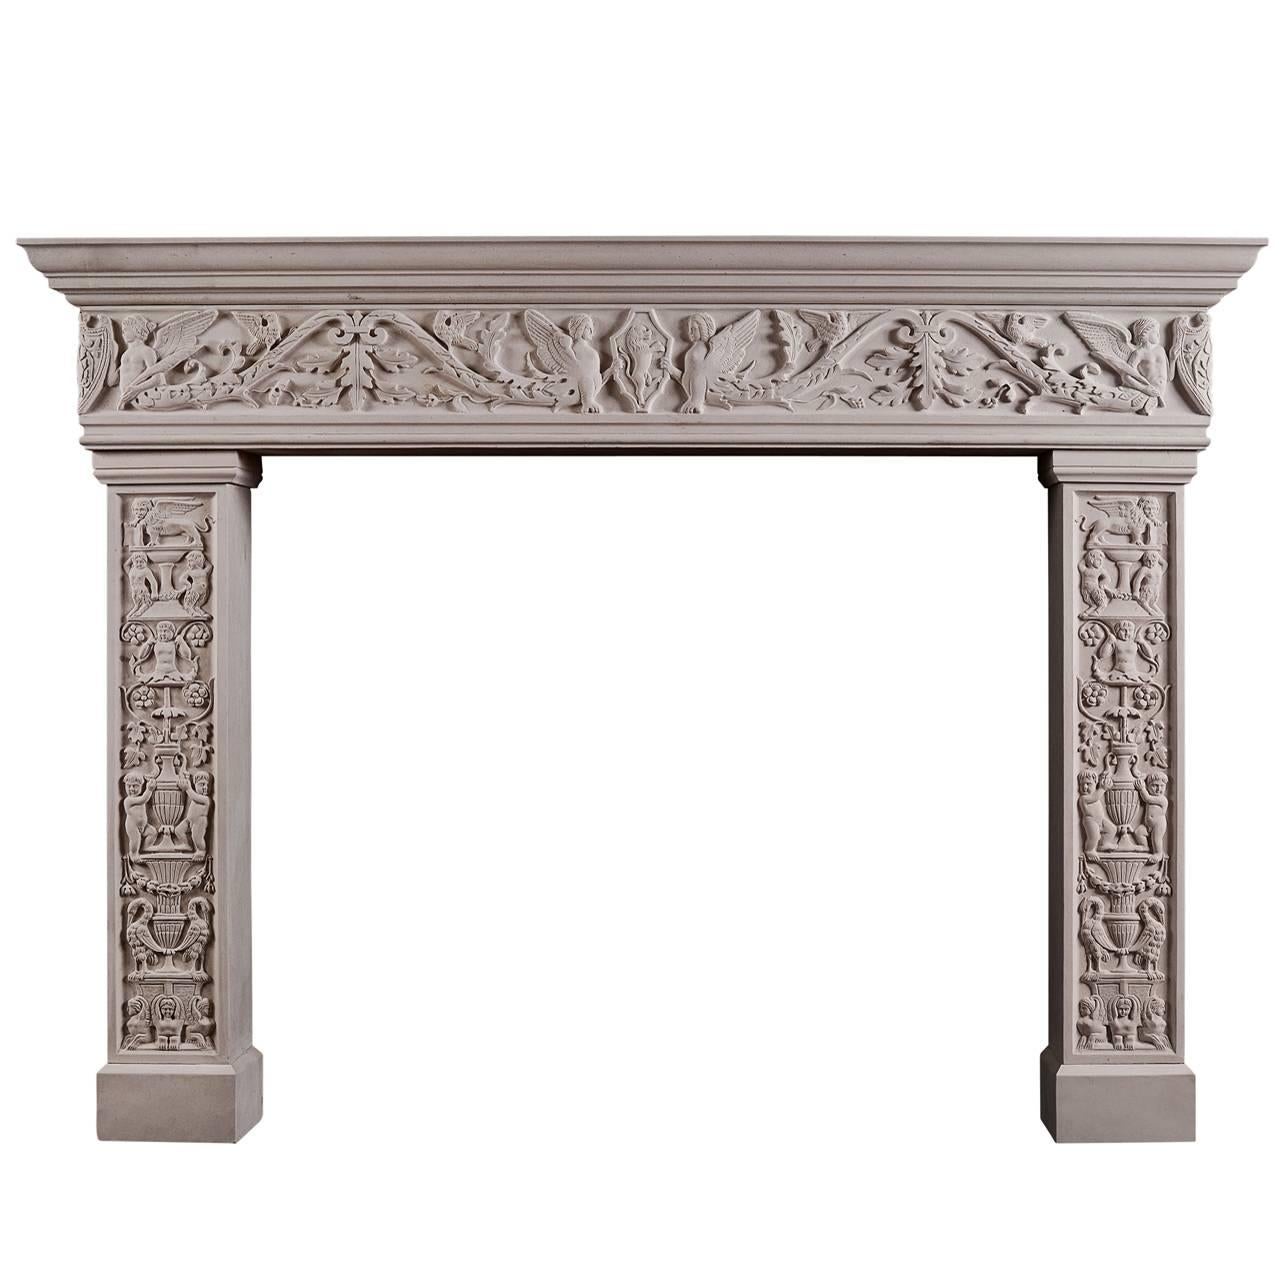 Carved Italian Renaissance Fireplace For Sale